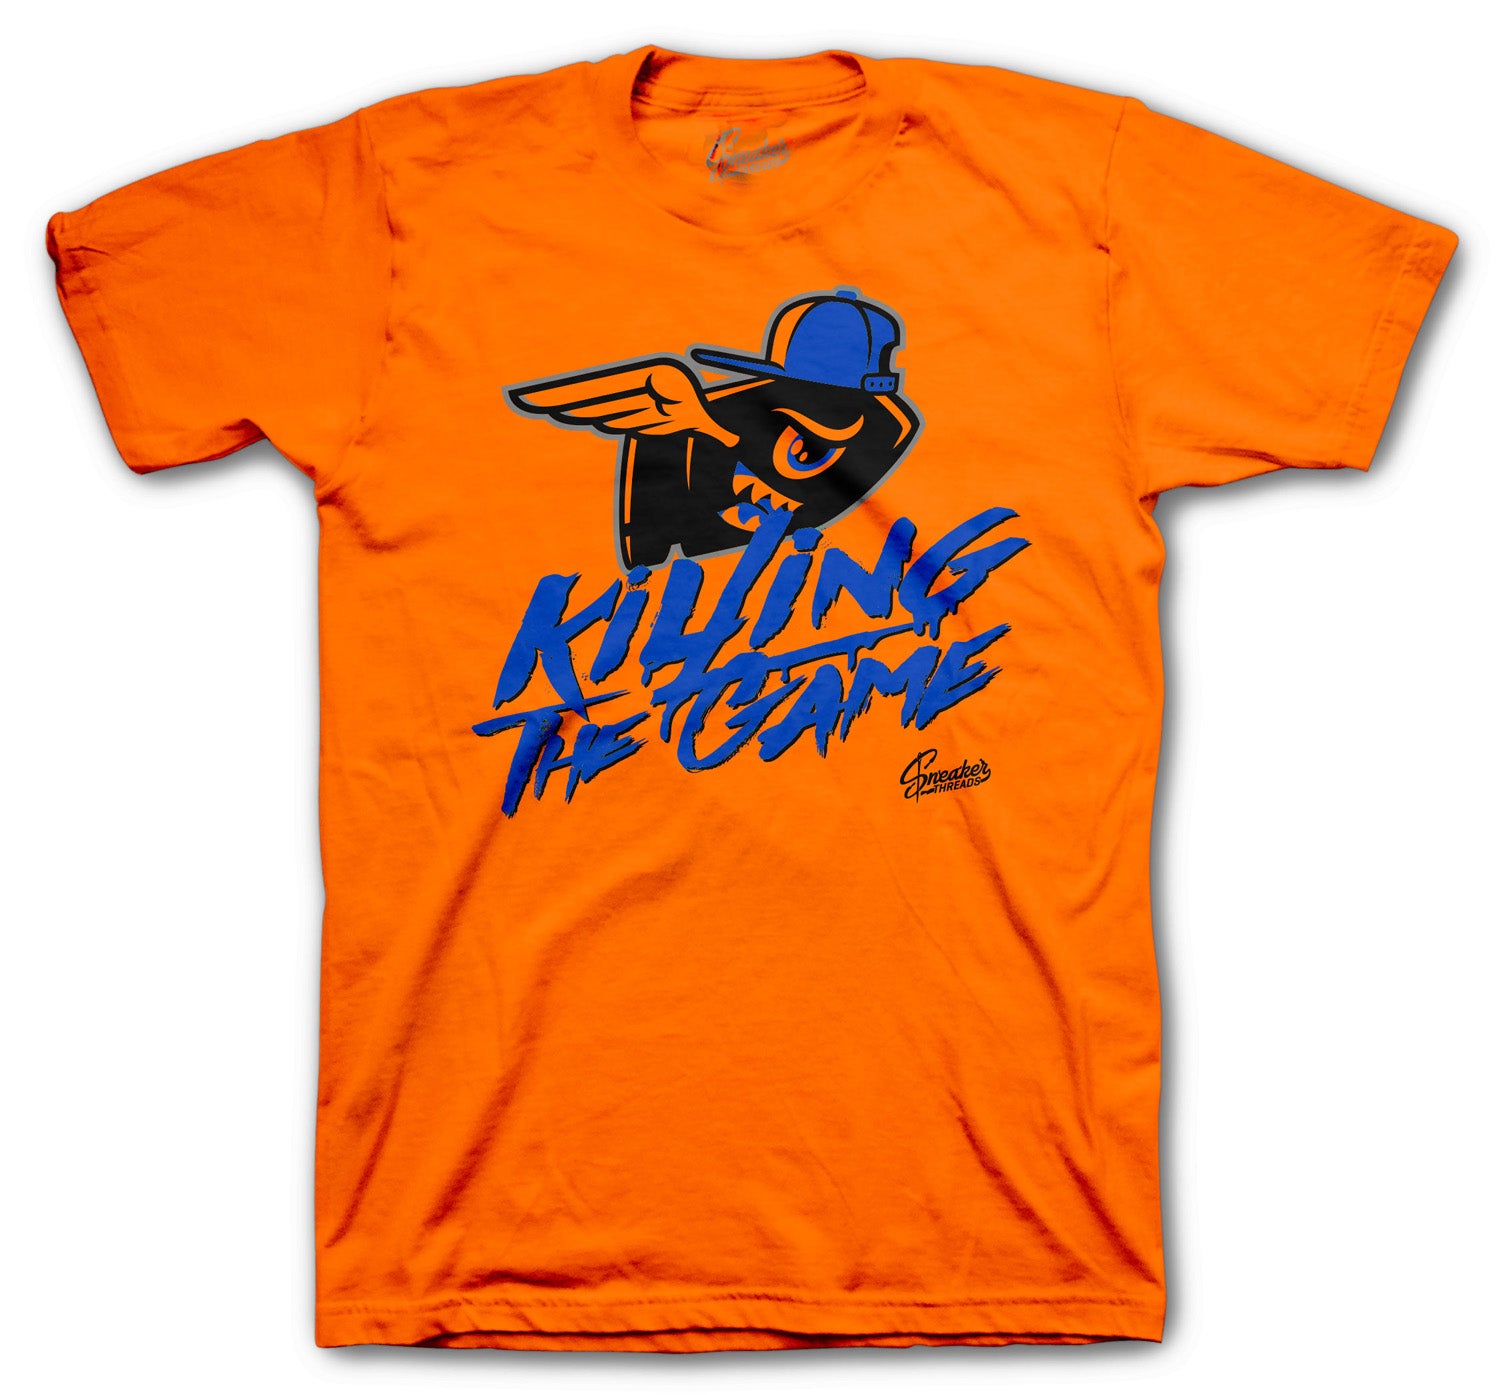 collection of tees designed to match the retro Jordan 3 knicks sneaker collection